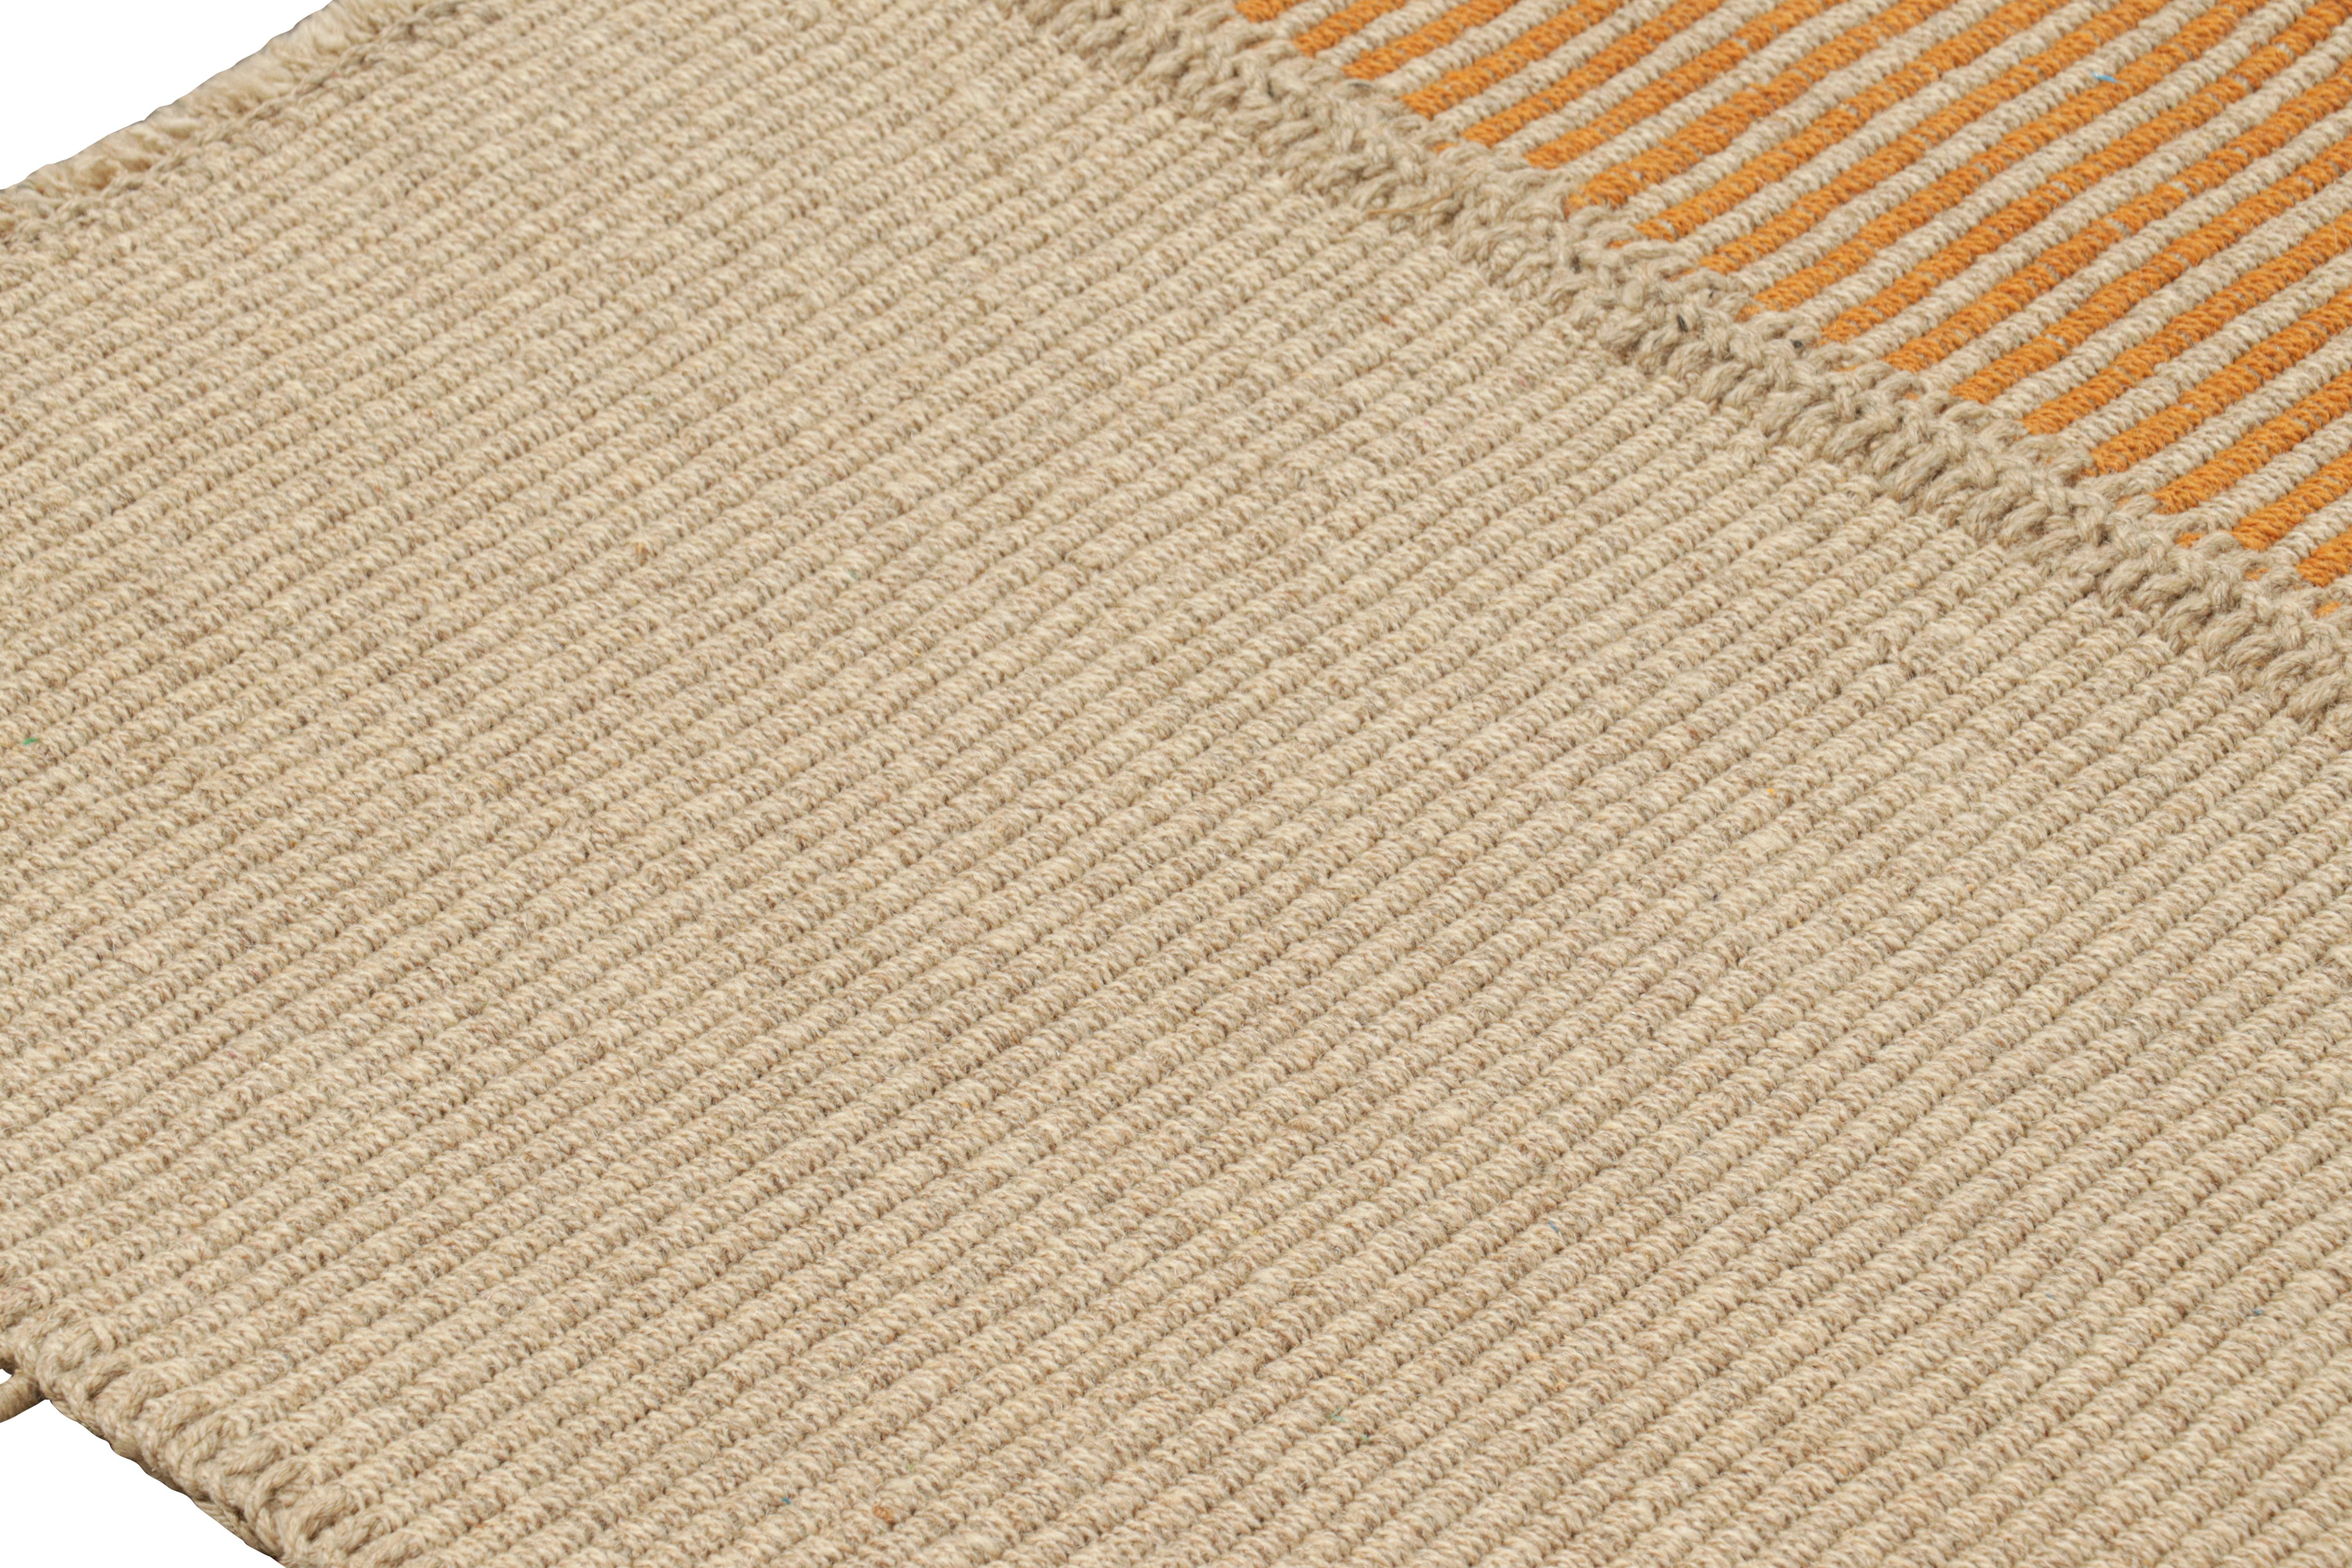 Rug & Kilim’s Contemporary Kilim in Orange and Beige Textural Stripes In New Condition For Sale In Long Island City, NY